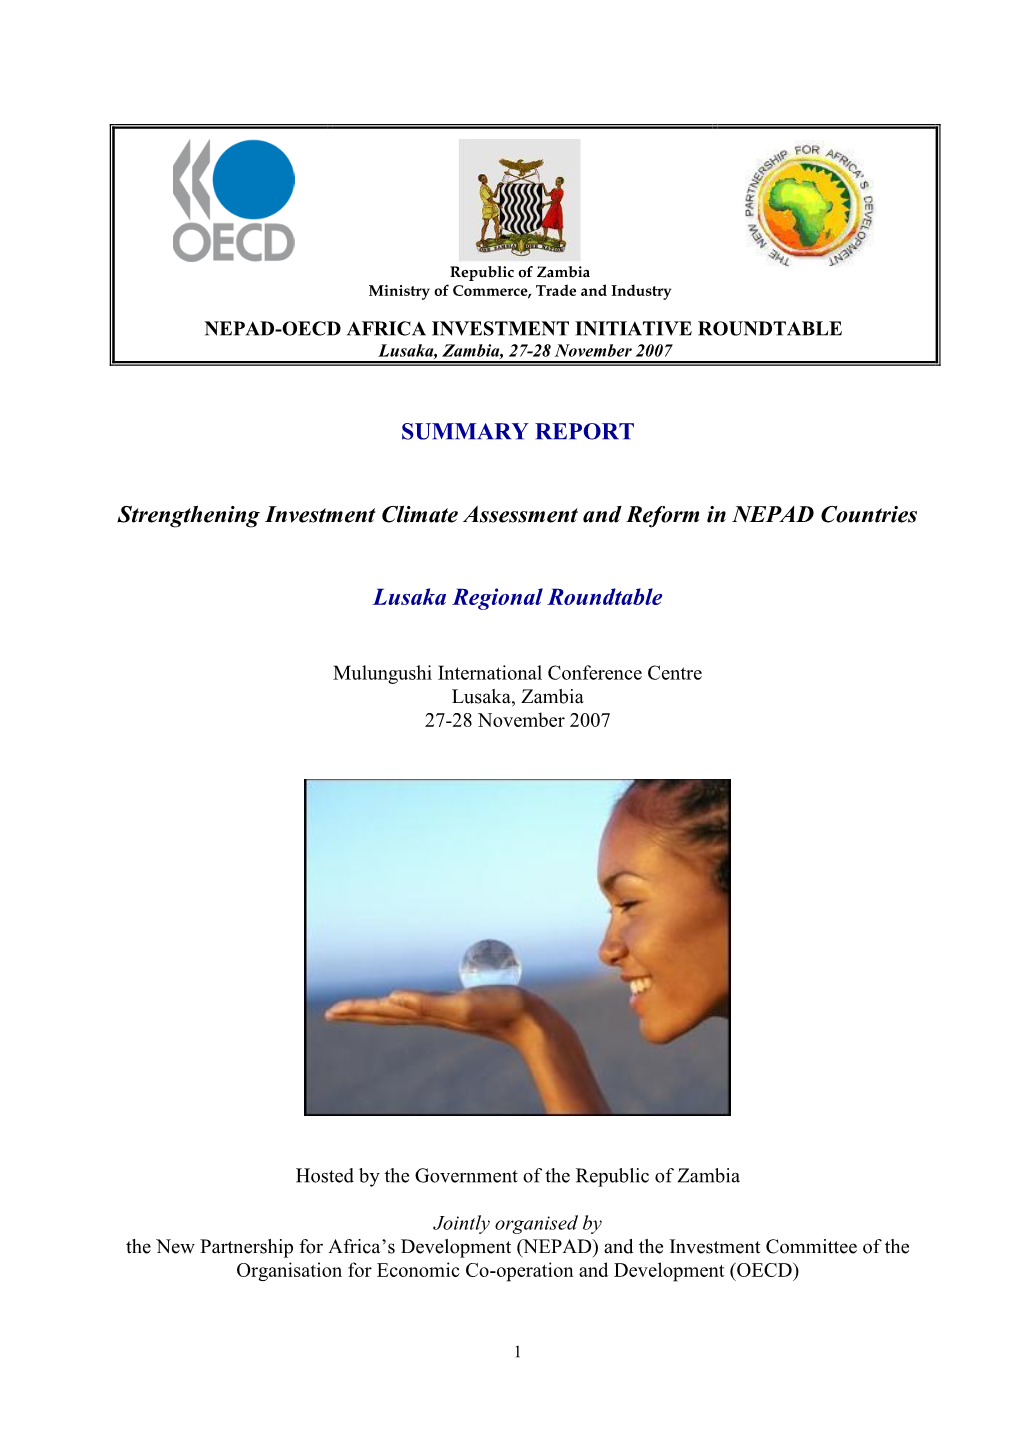 SUMMARY REPORT Strengthening Investment Climate Assessment